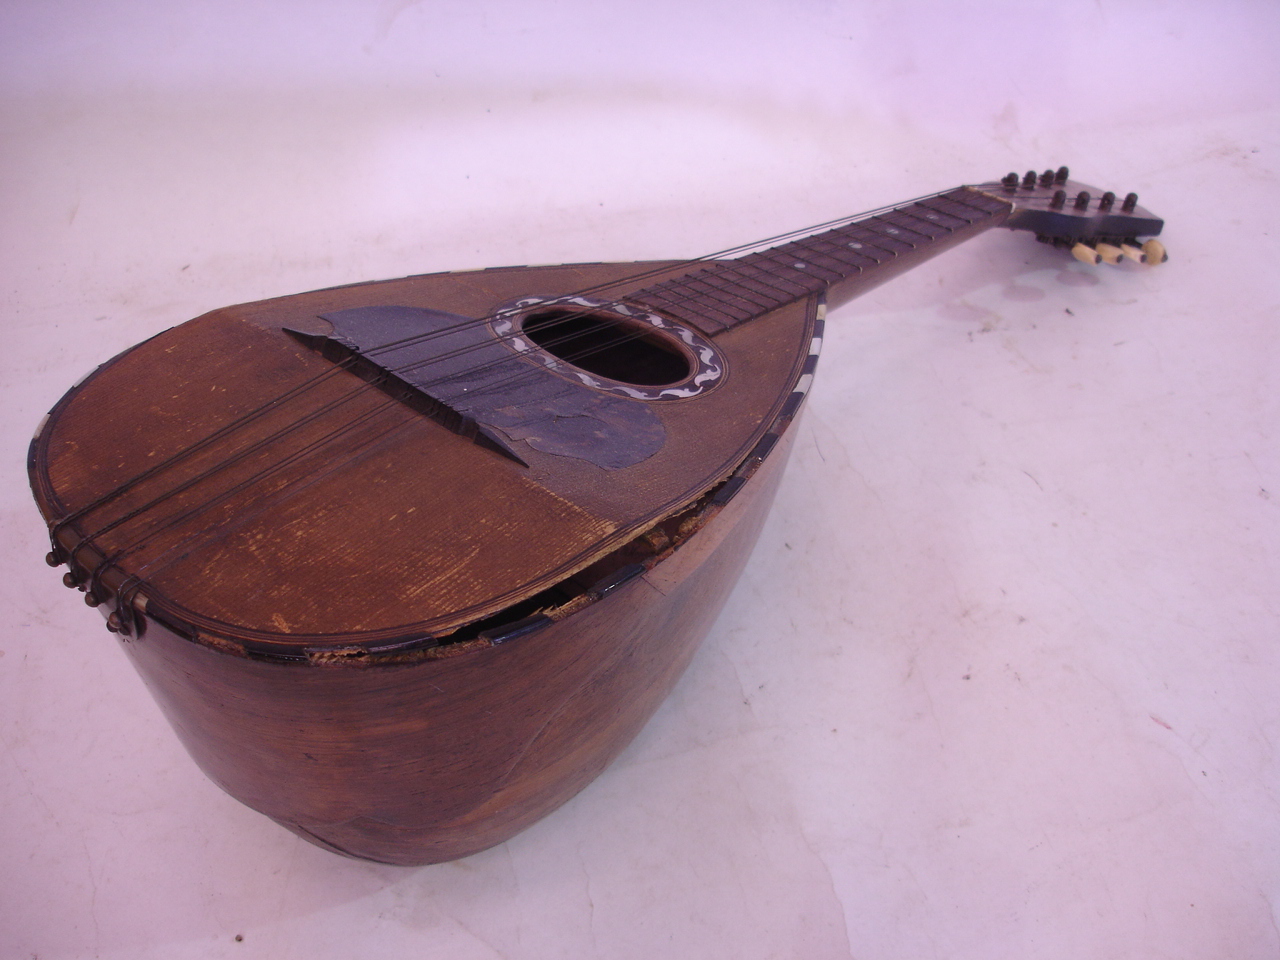 A mandolin bears label for Michele Maratea. (Damage to front board and repairs to neck) 23" long